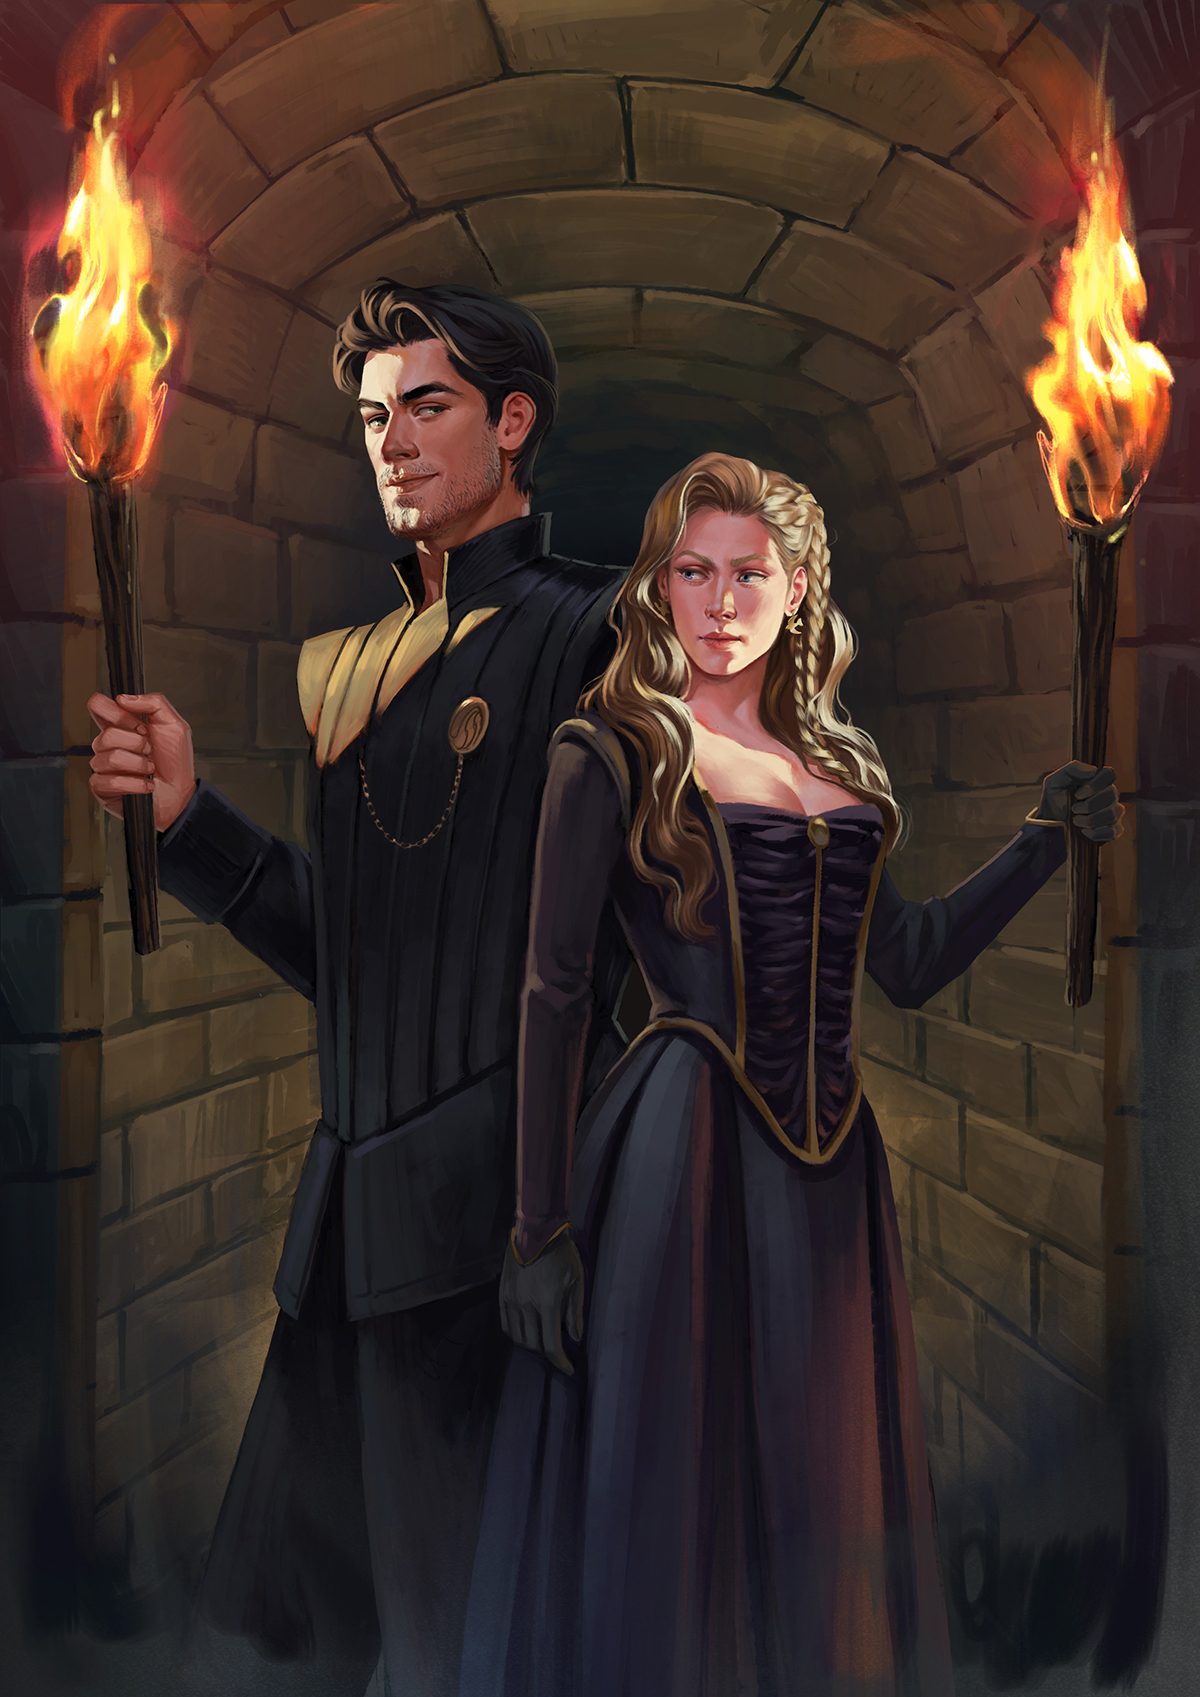 Kingdom of Claw character art: Saga and Rurik hold torches in the tunnels under the castle